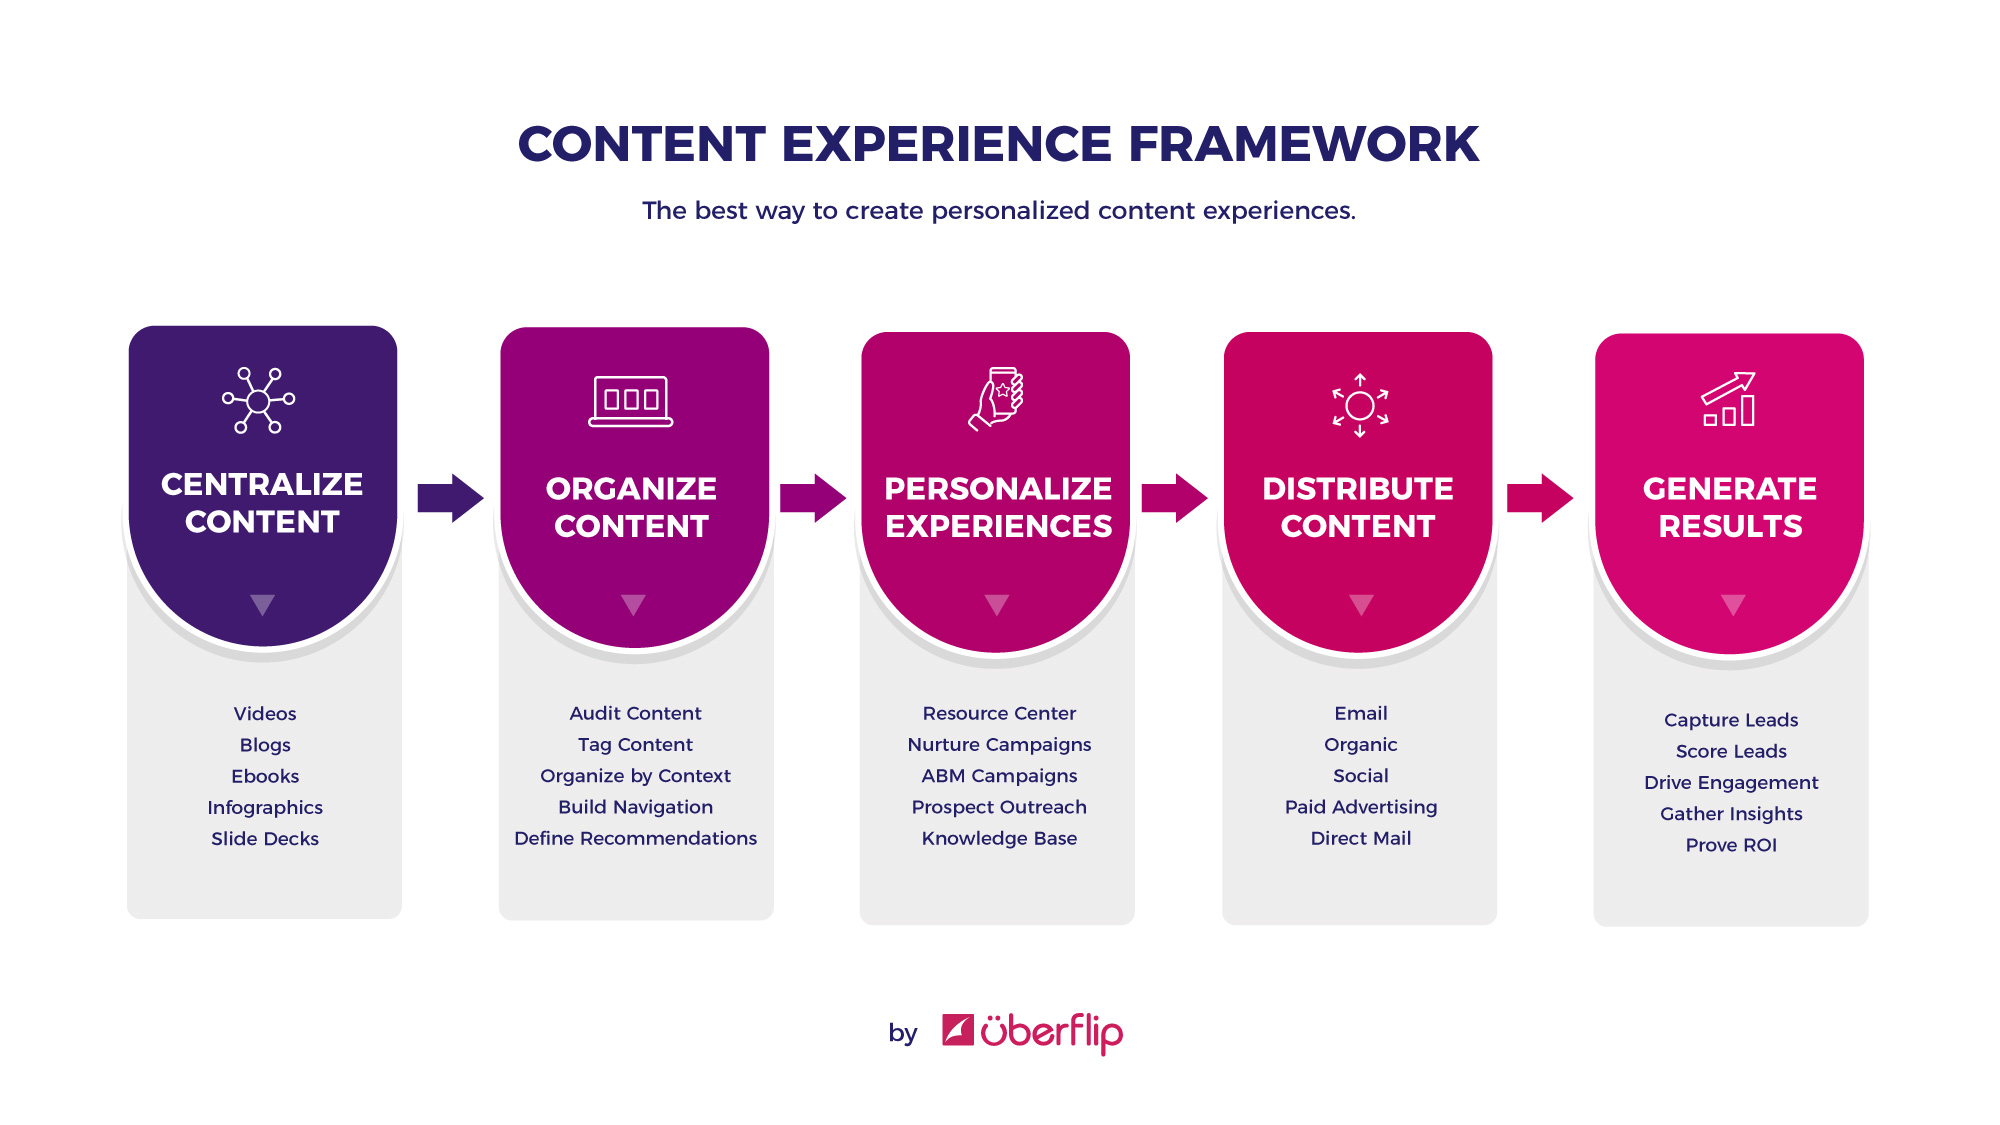 Content Experience Framework by Uberflip